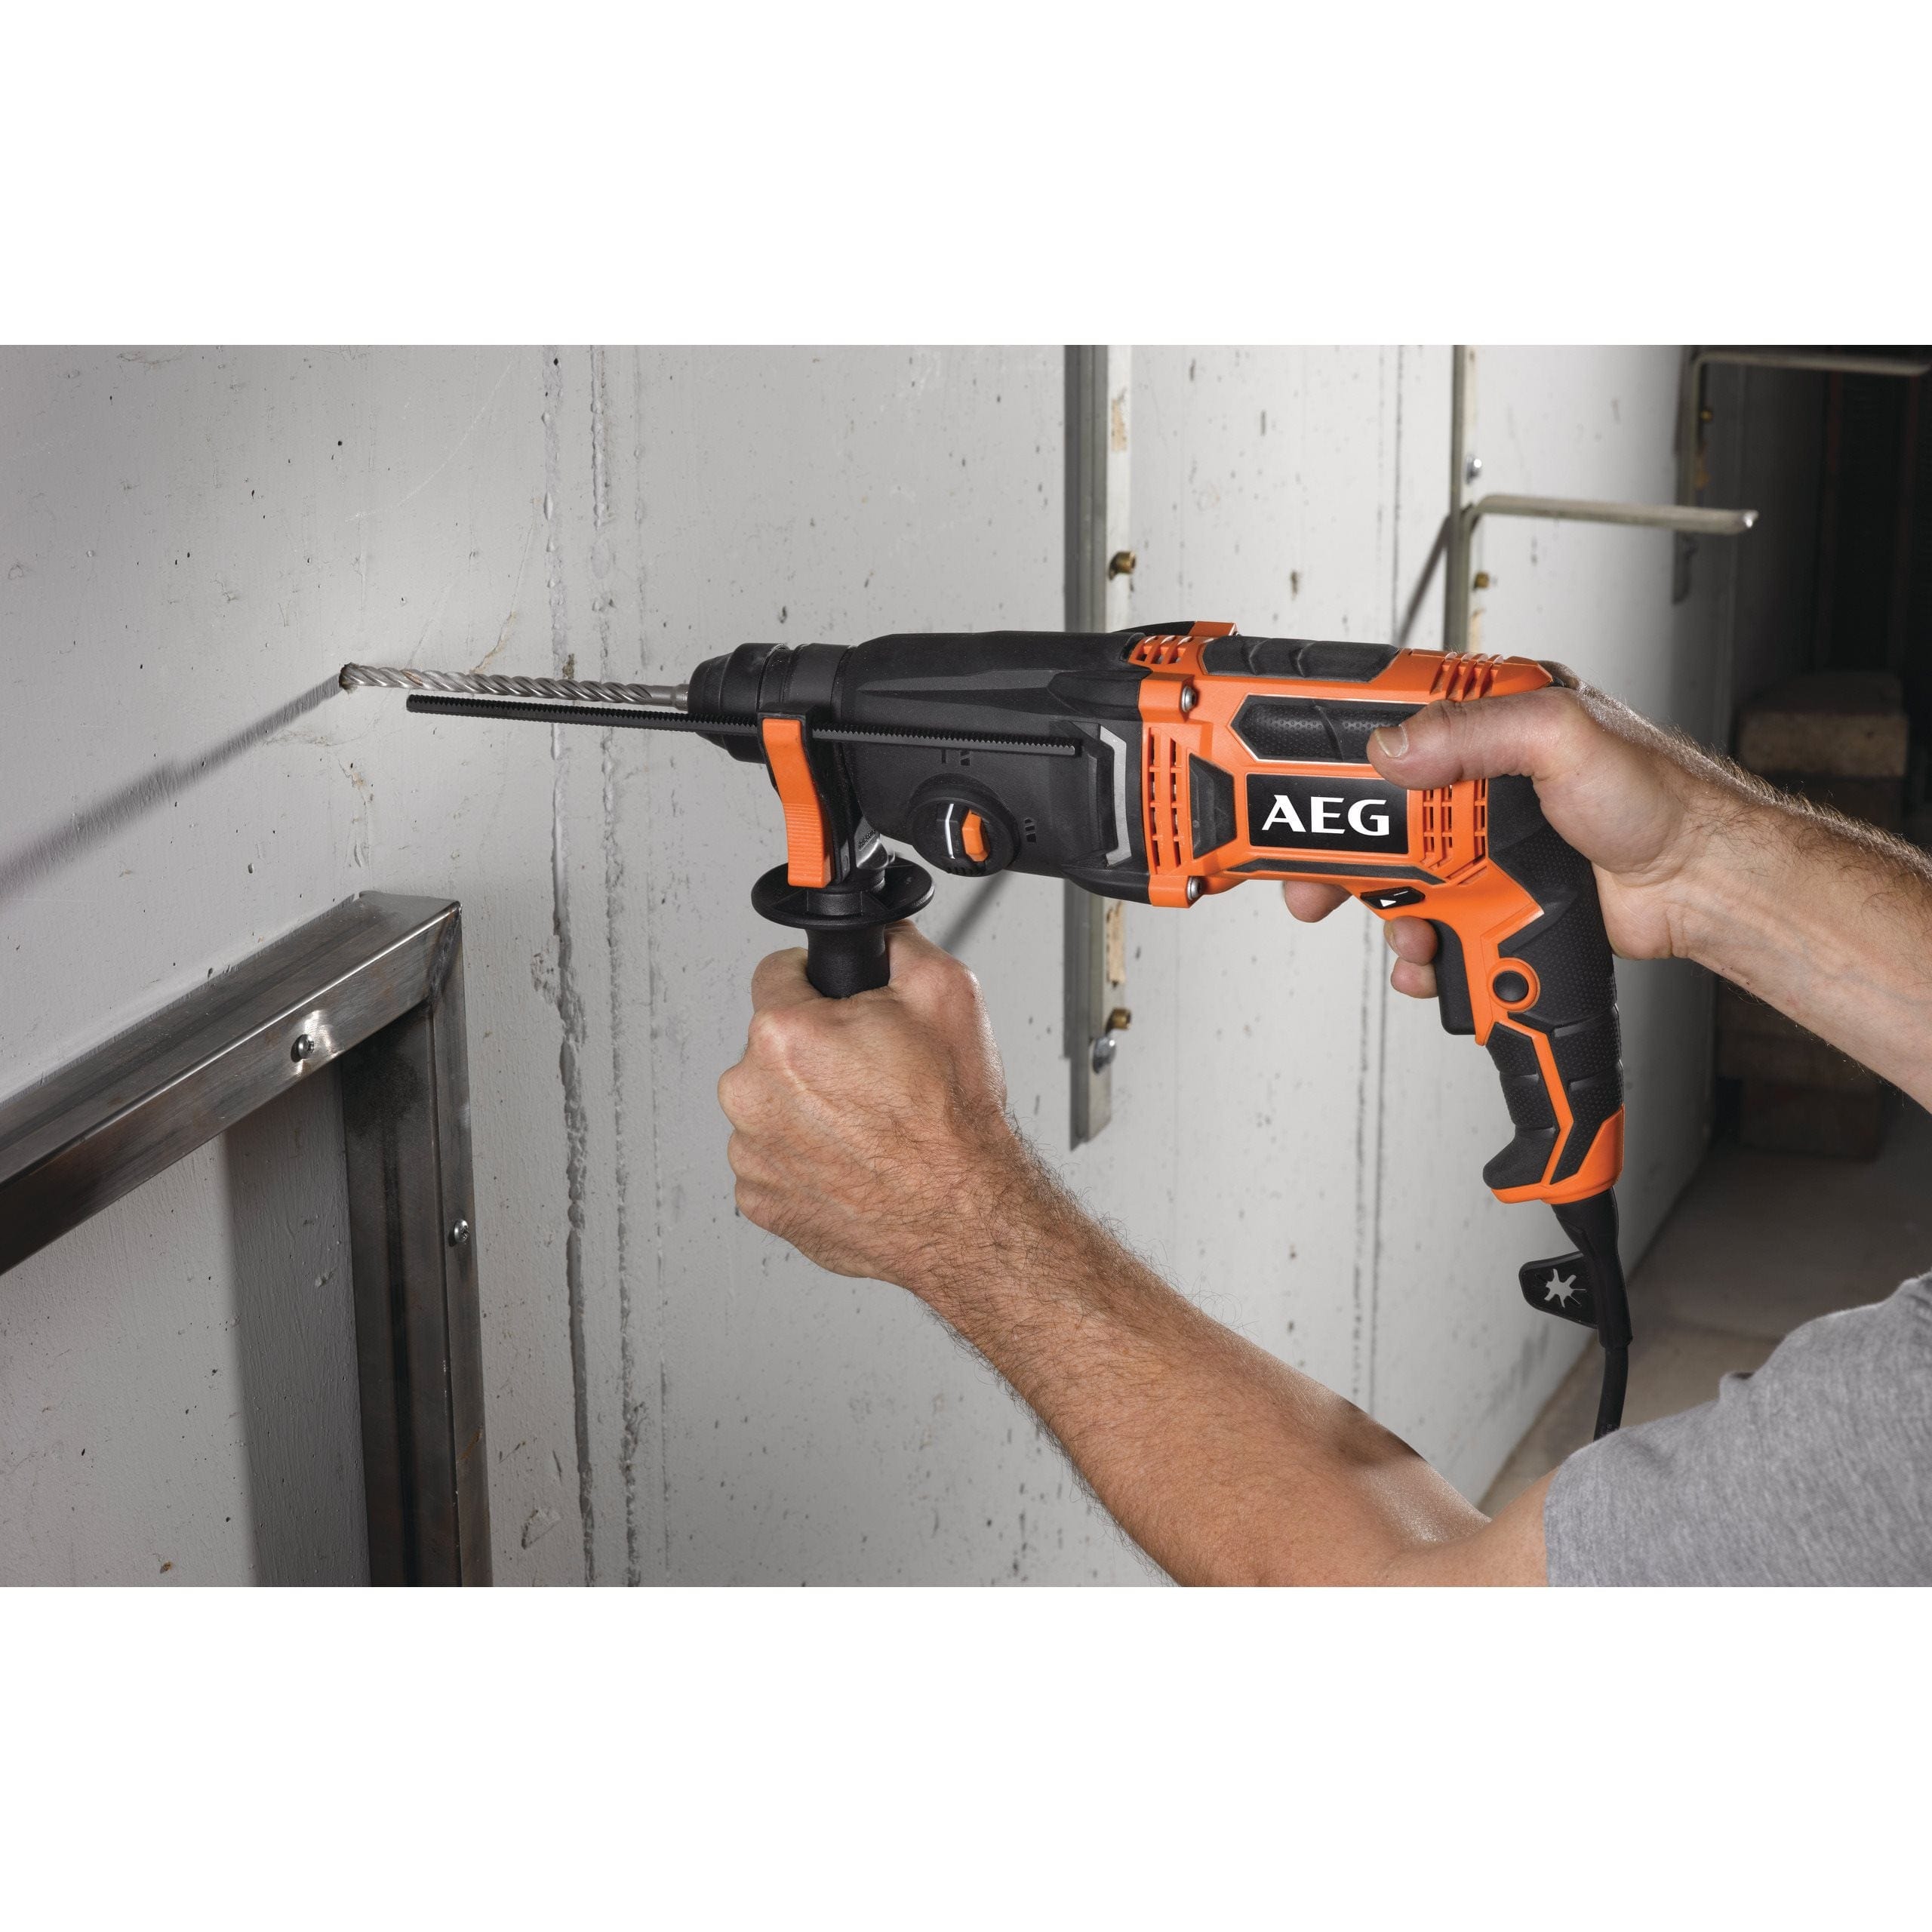 AEG 800W SDS-Plus Combi Hammer Drill - BH24IE | Supply Master Accra, Ghana Drill Buy Tools hardware Building materials